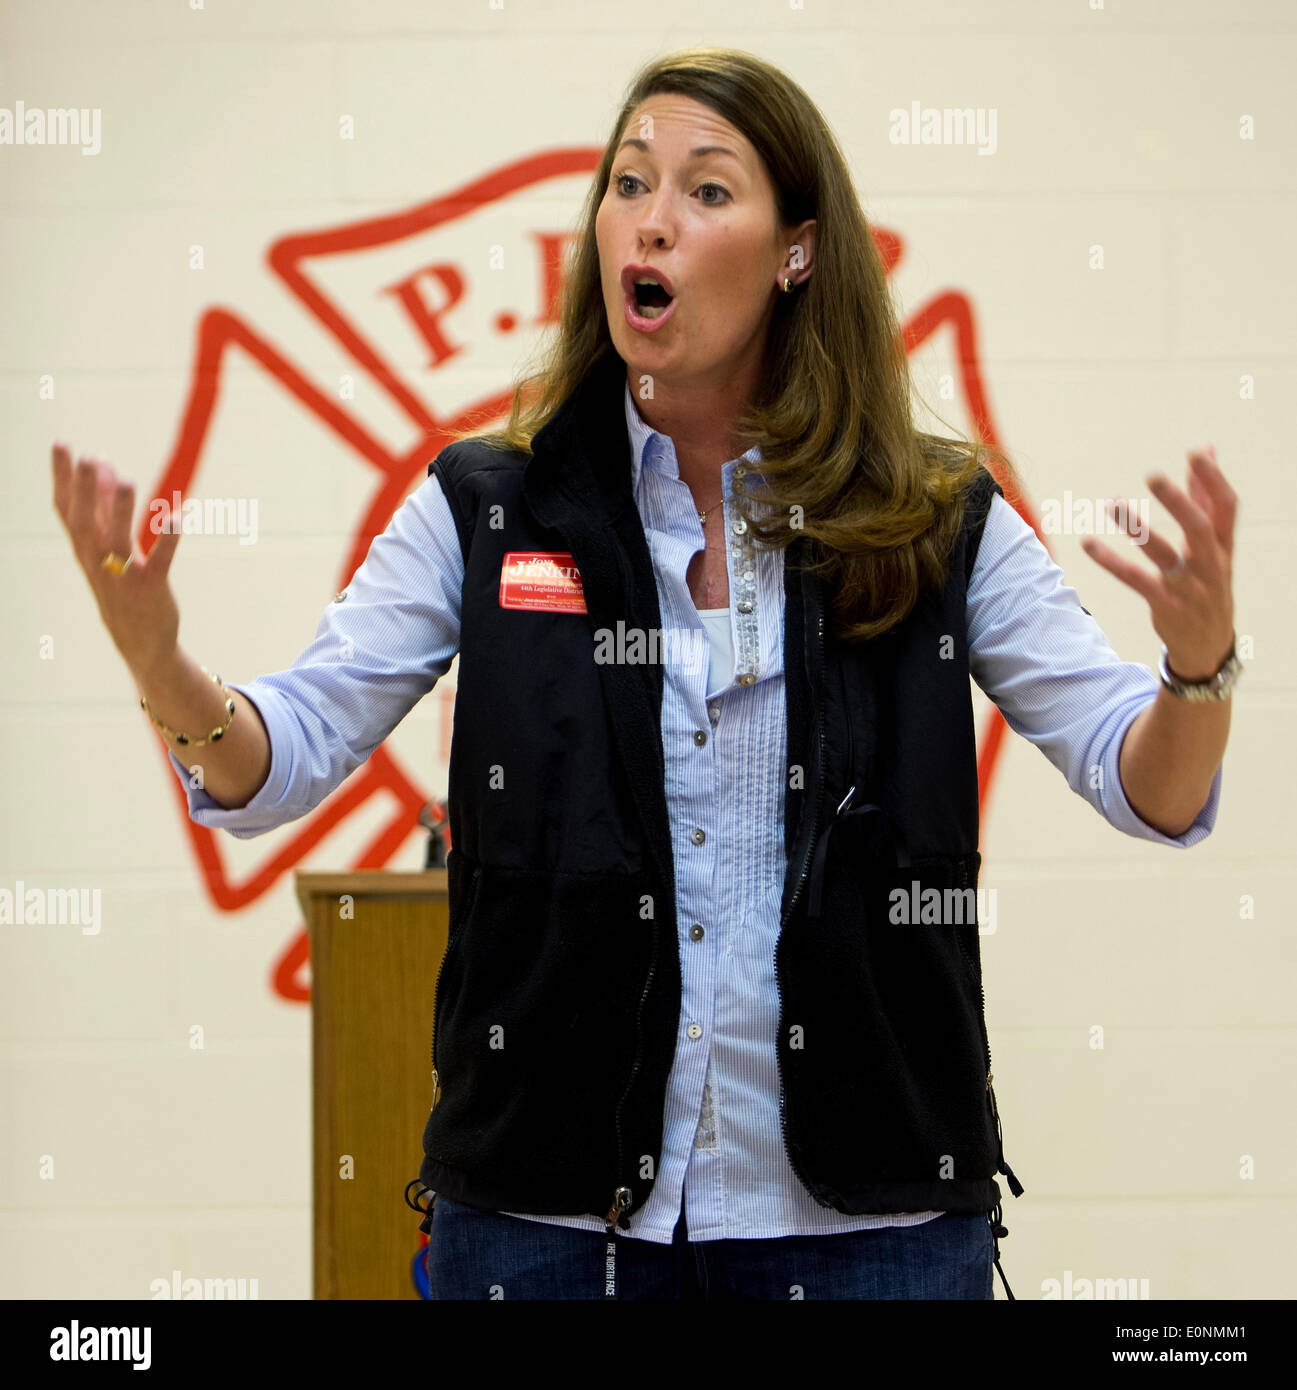 Louisville, Kentucky, USA. 17th May, 2014. ALISON LUNDERGAN GRIMES, Kentucky's Secretary of State, speaks at the 14th Annual Joni Jenkins Breakfast of Champions at the PRP Fire Training Center during her 50-county Alison for Kentucky Jobs Bus Tour. Mrs. Grimes is expected to win the Democratic Senate primary next Tuesday. © Brian Cahn/ZUMAPRESS.com/Alamy Live News Stock Photo